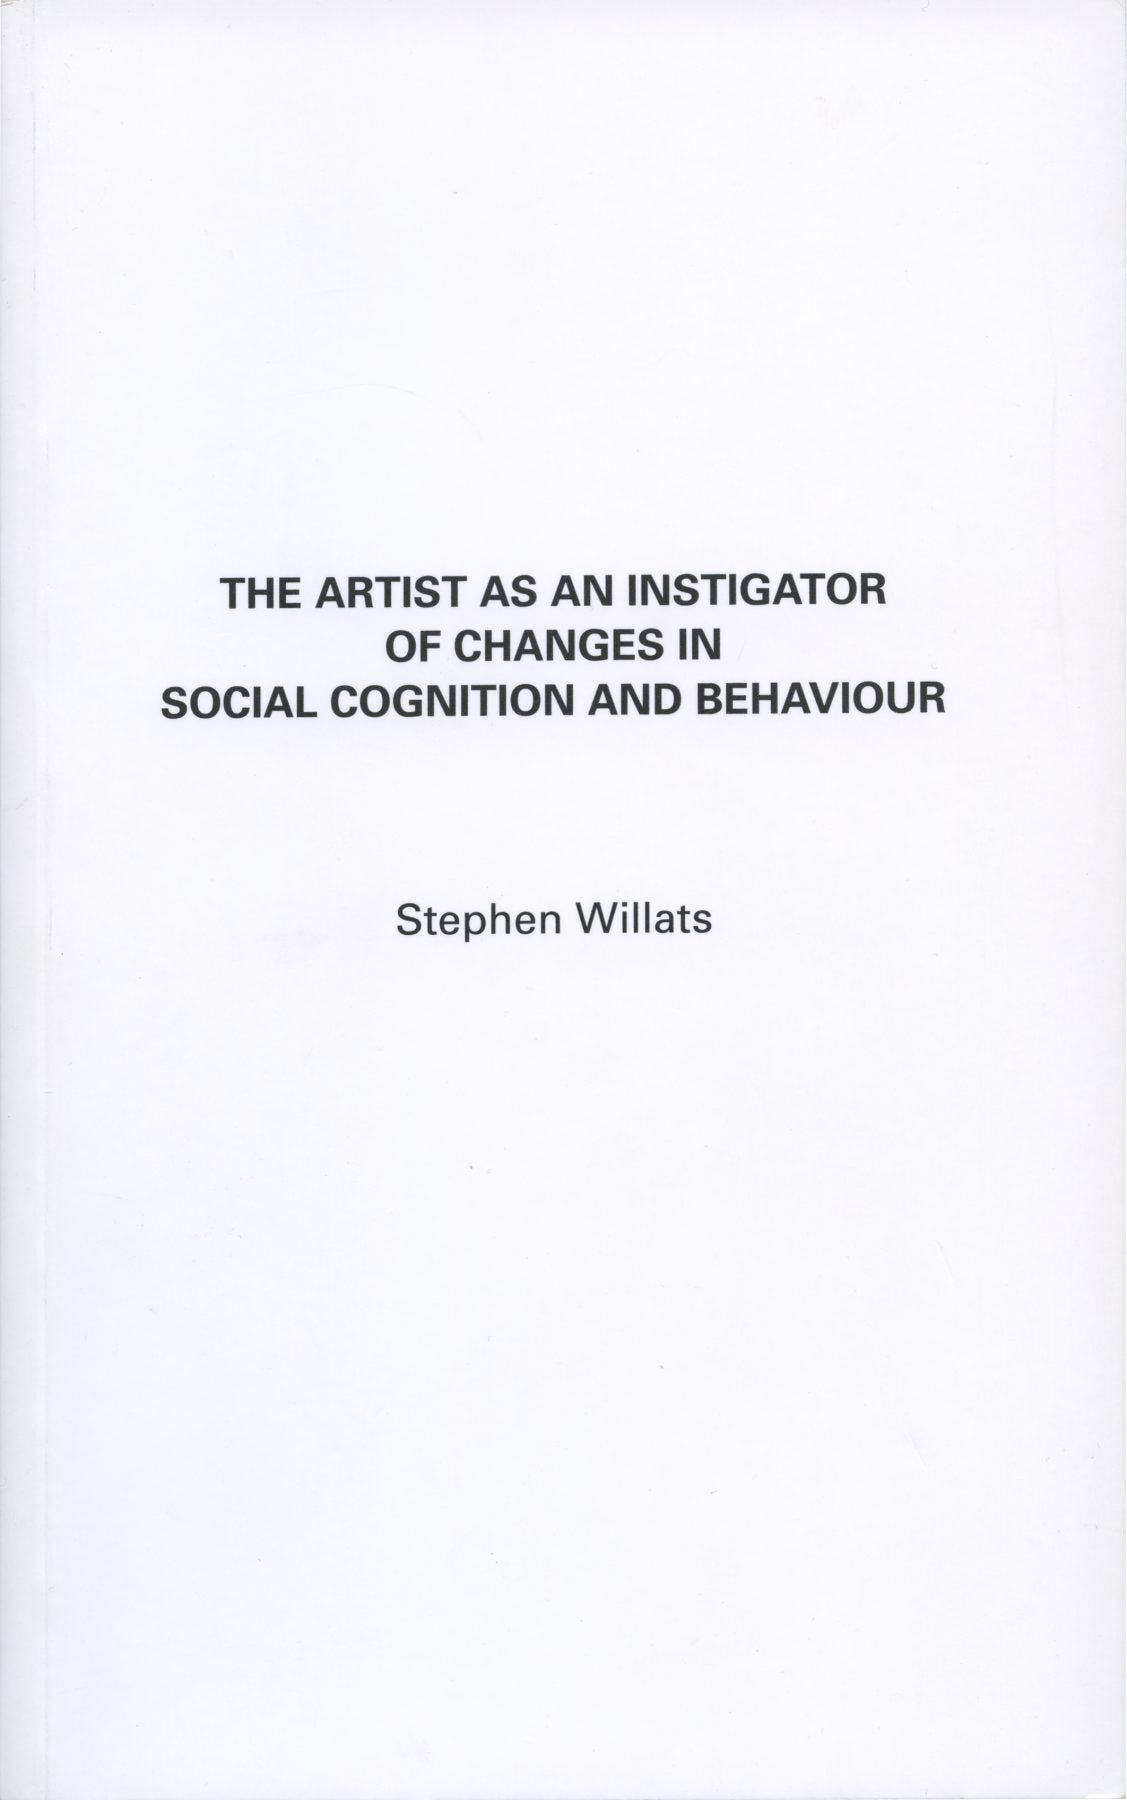 Stephen Willats: The Artist as an Instigator of Changes in Social Cognition and Behaviour